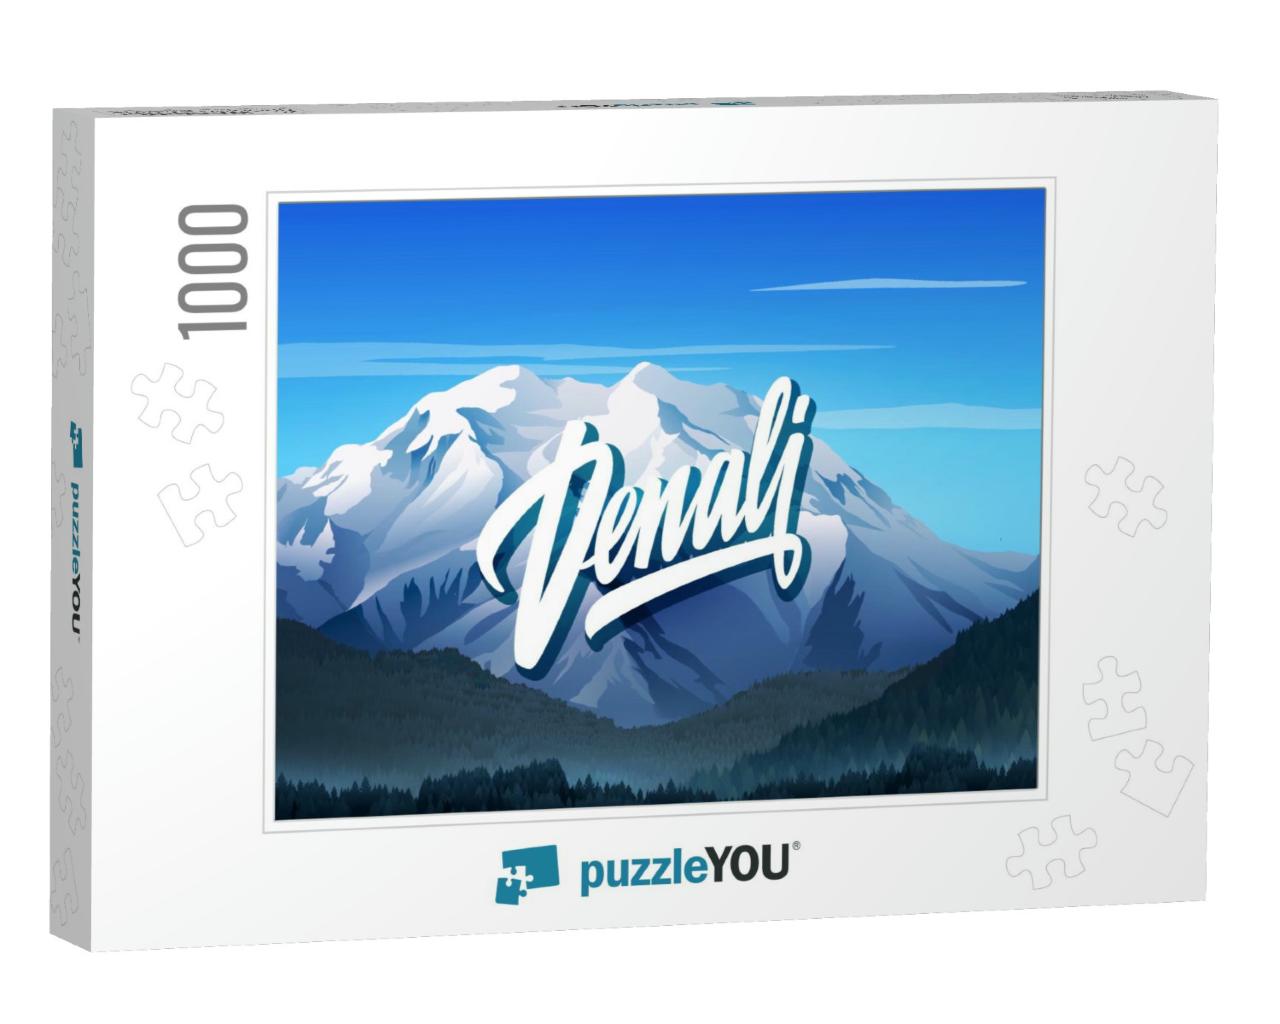 Denali Hand Drawn Vector Lettering with Mountains, Trees... Jigsaw Puzzle with 1000 pieces